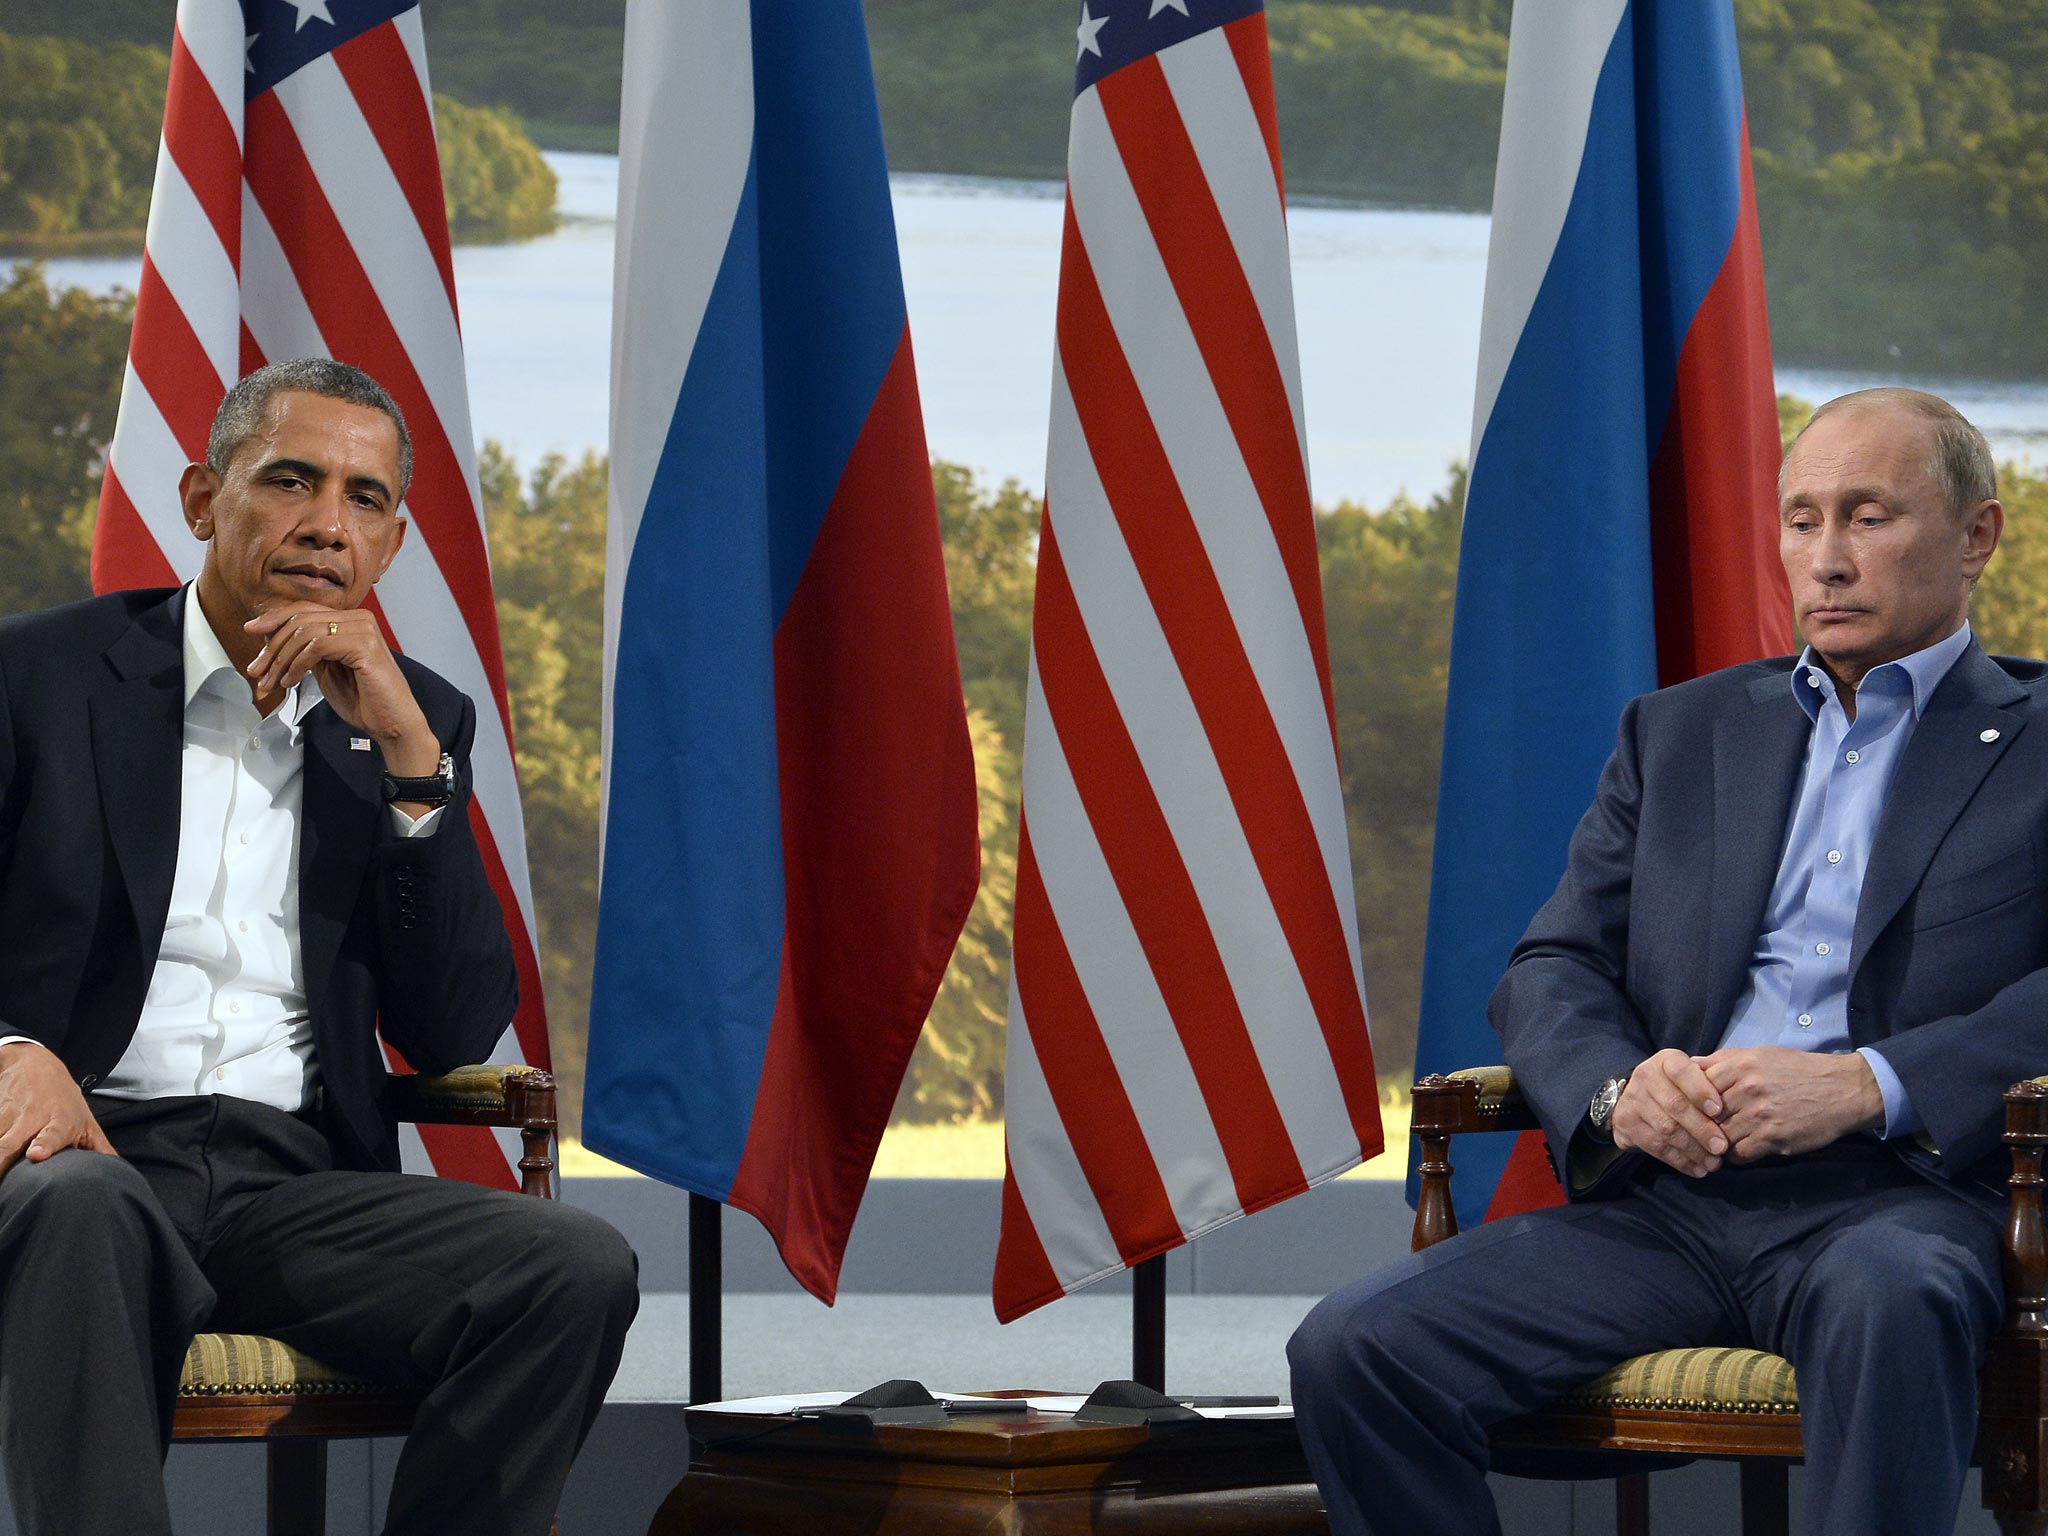 Relations between Washington and Moscow already strained